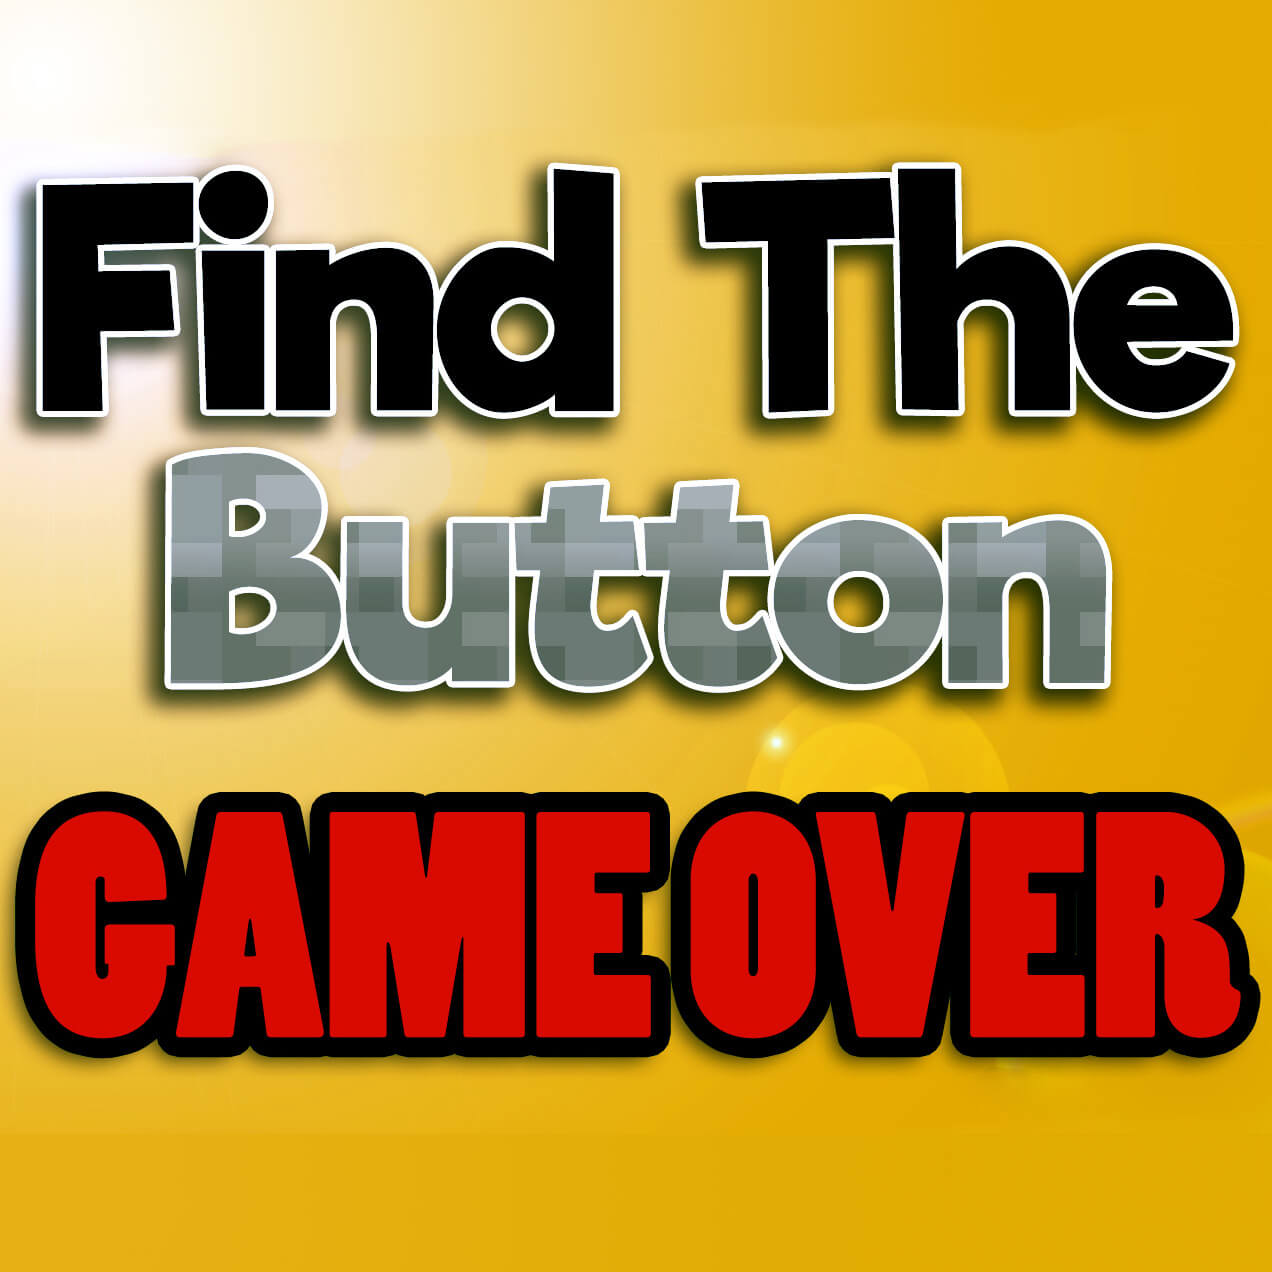 Find The Button - Game Over screenshot 1